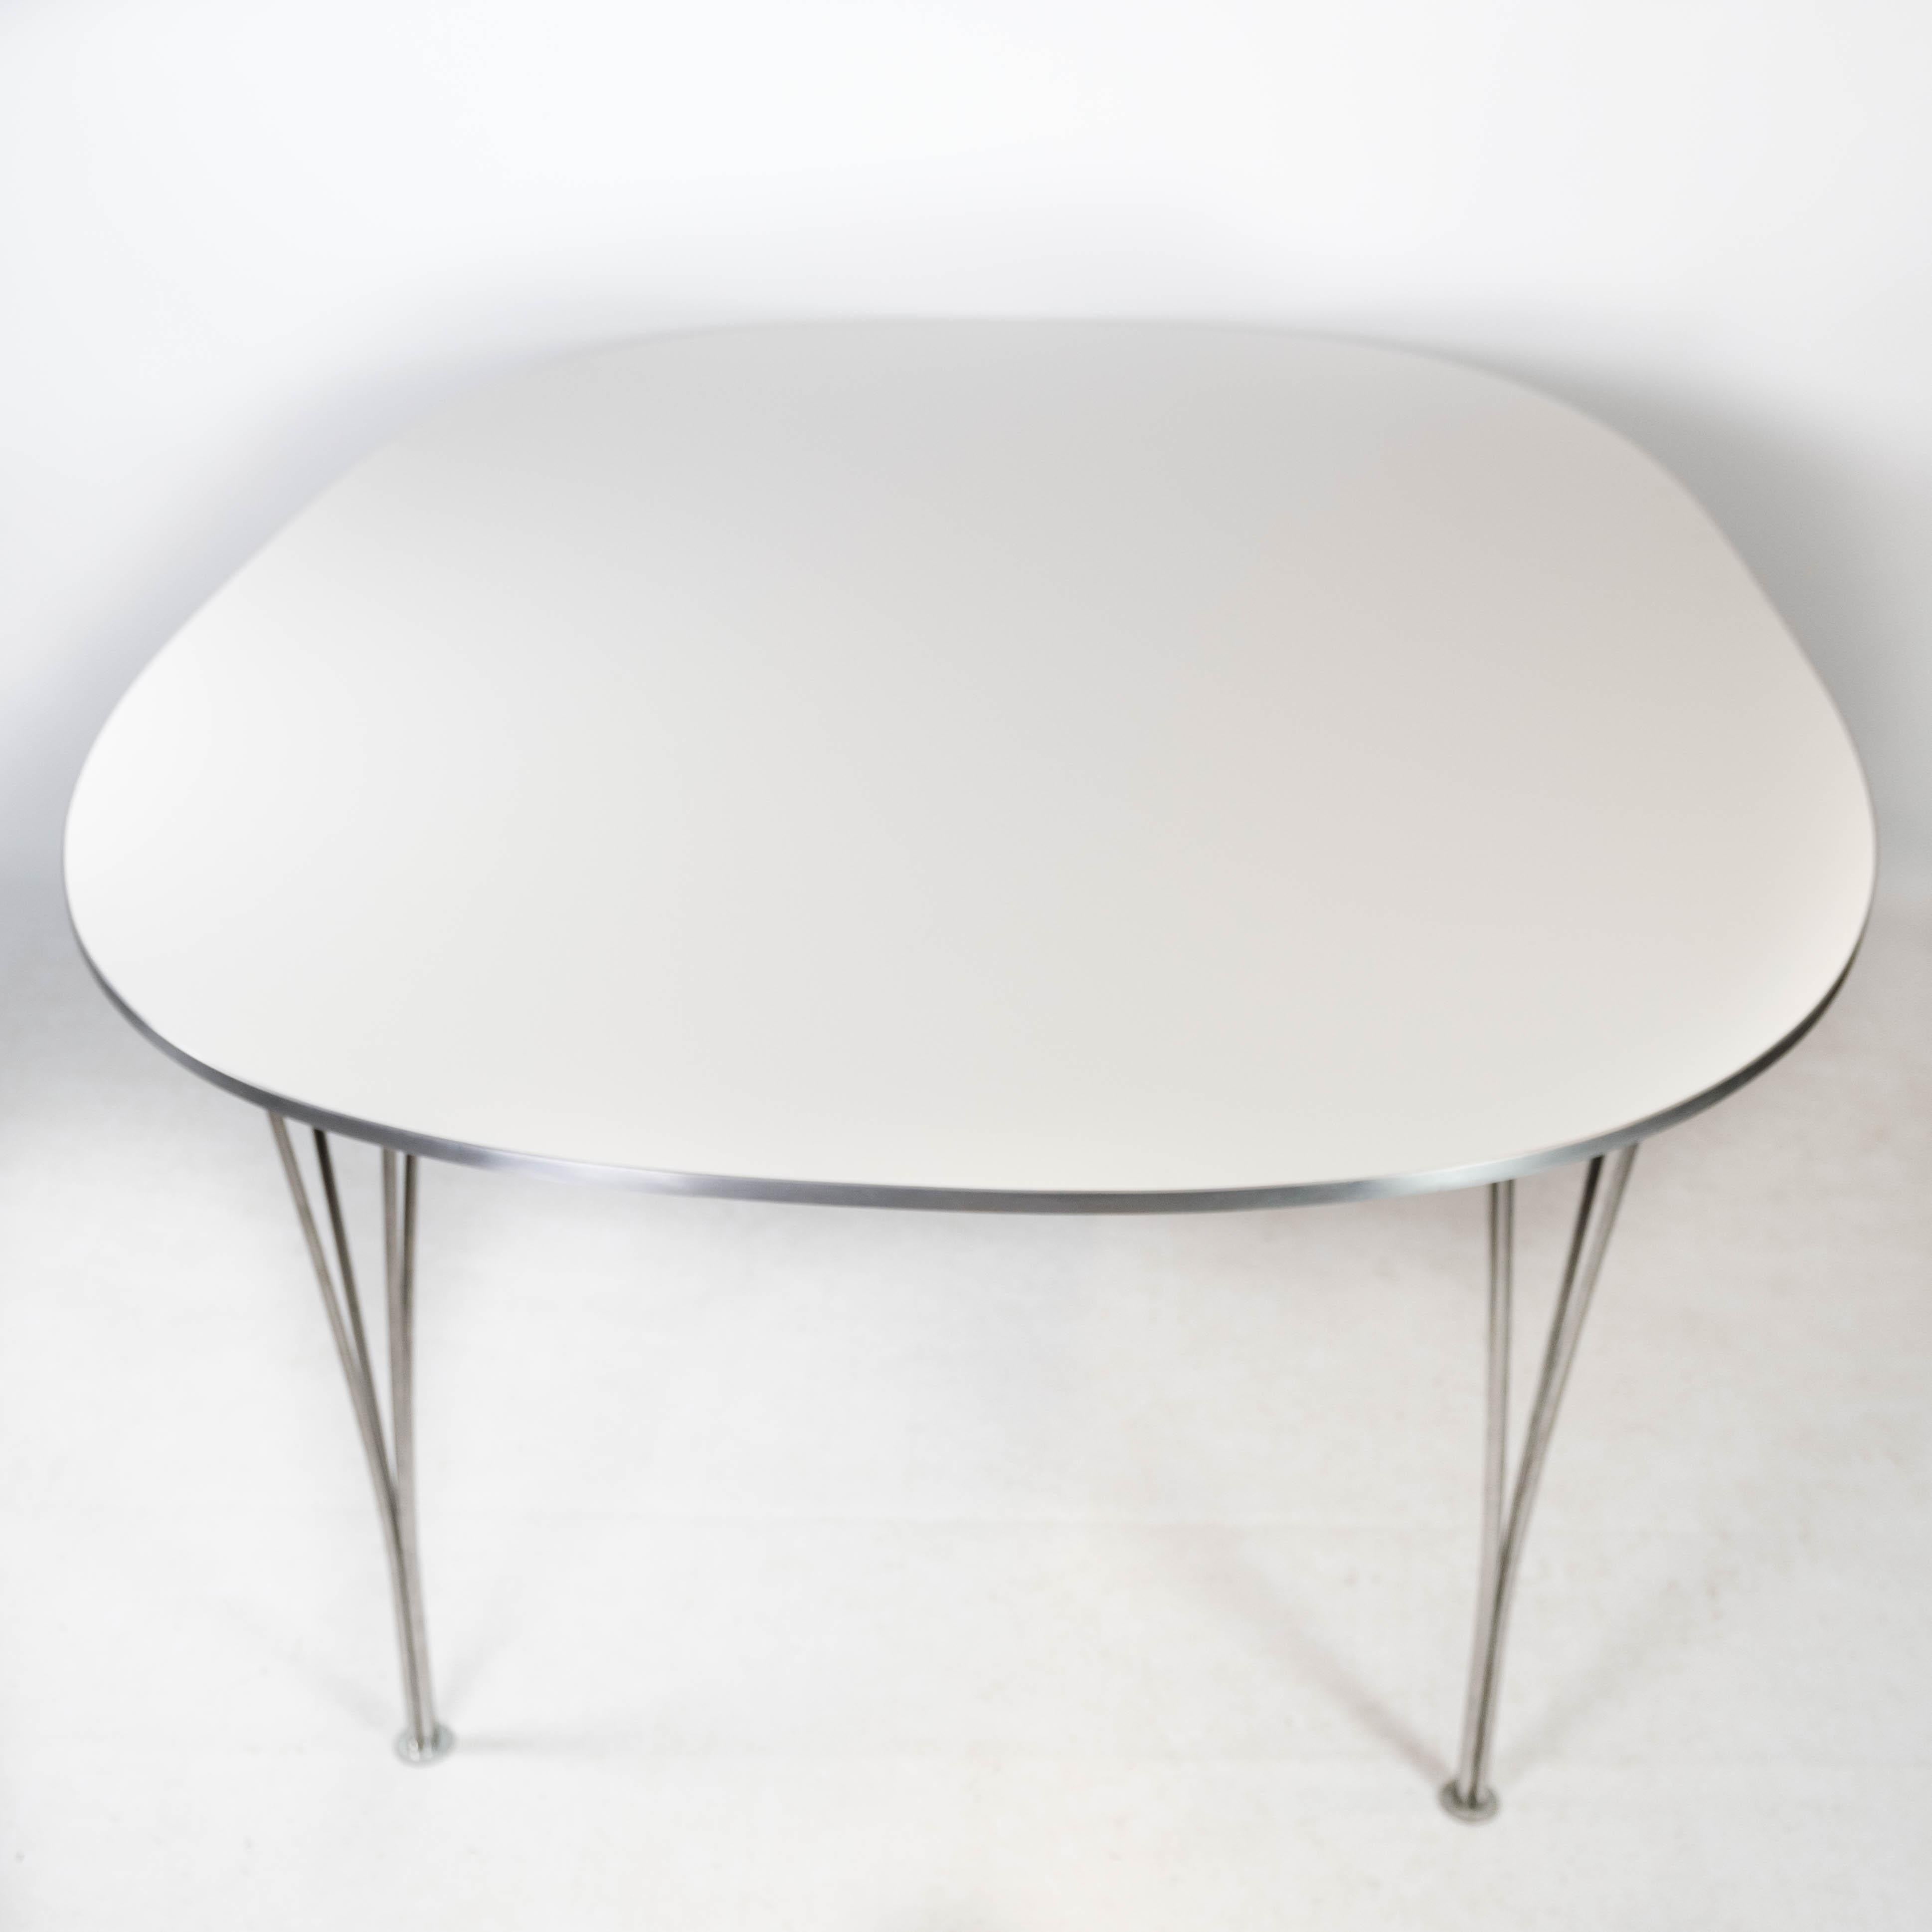 Super Ellipse Dining Table Designed By Piet Hein From 1998 For Sale 1